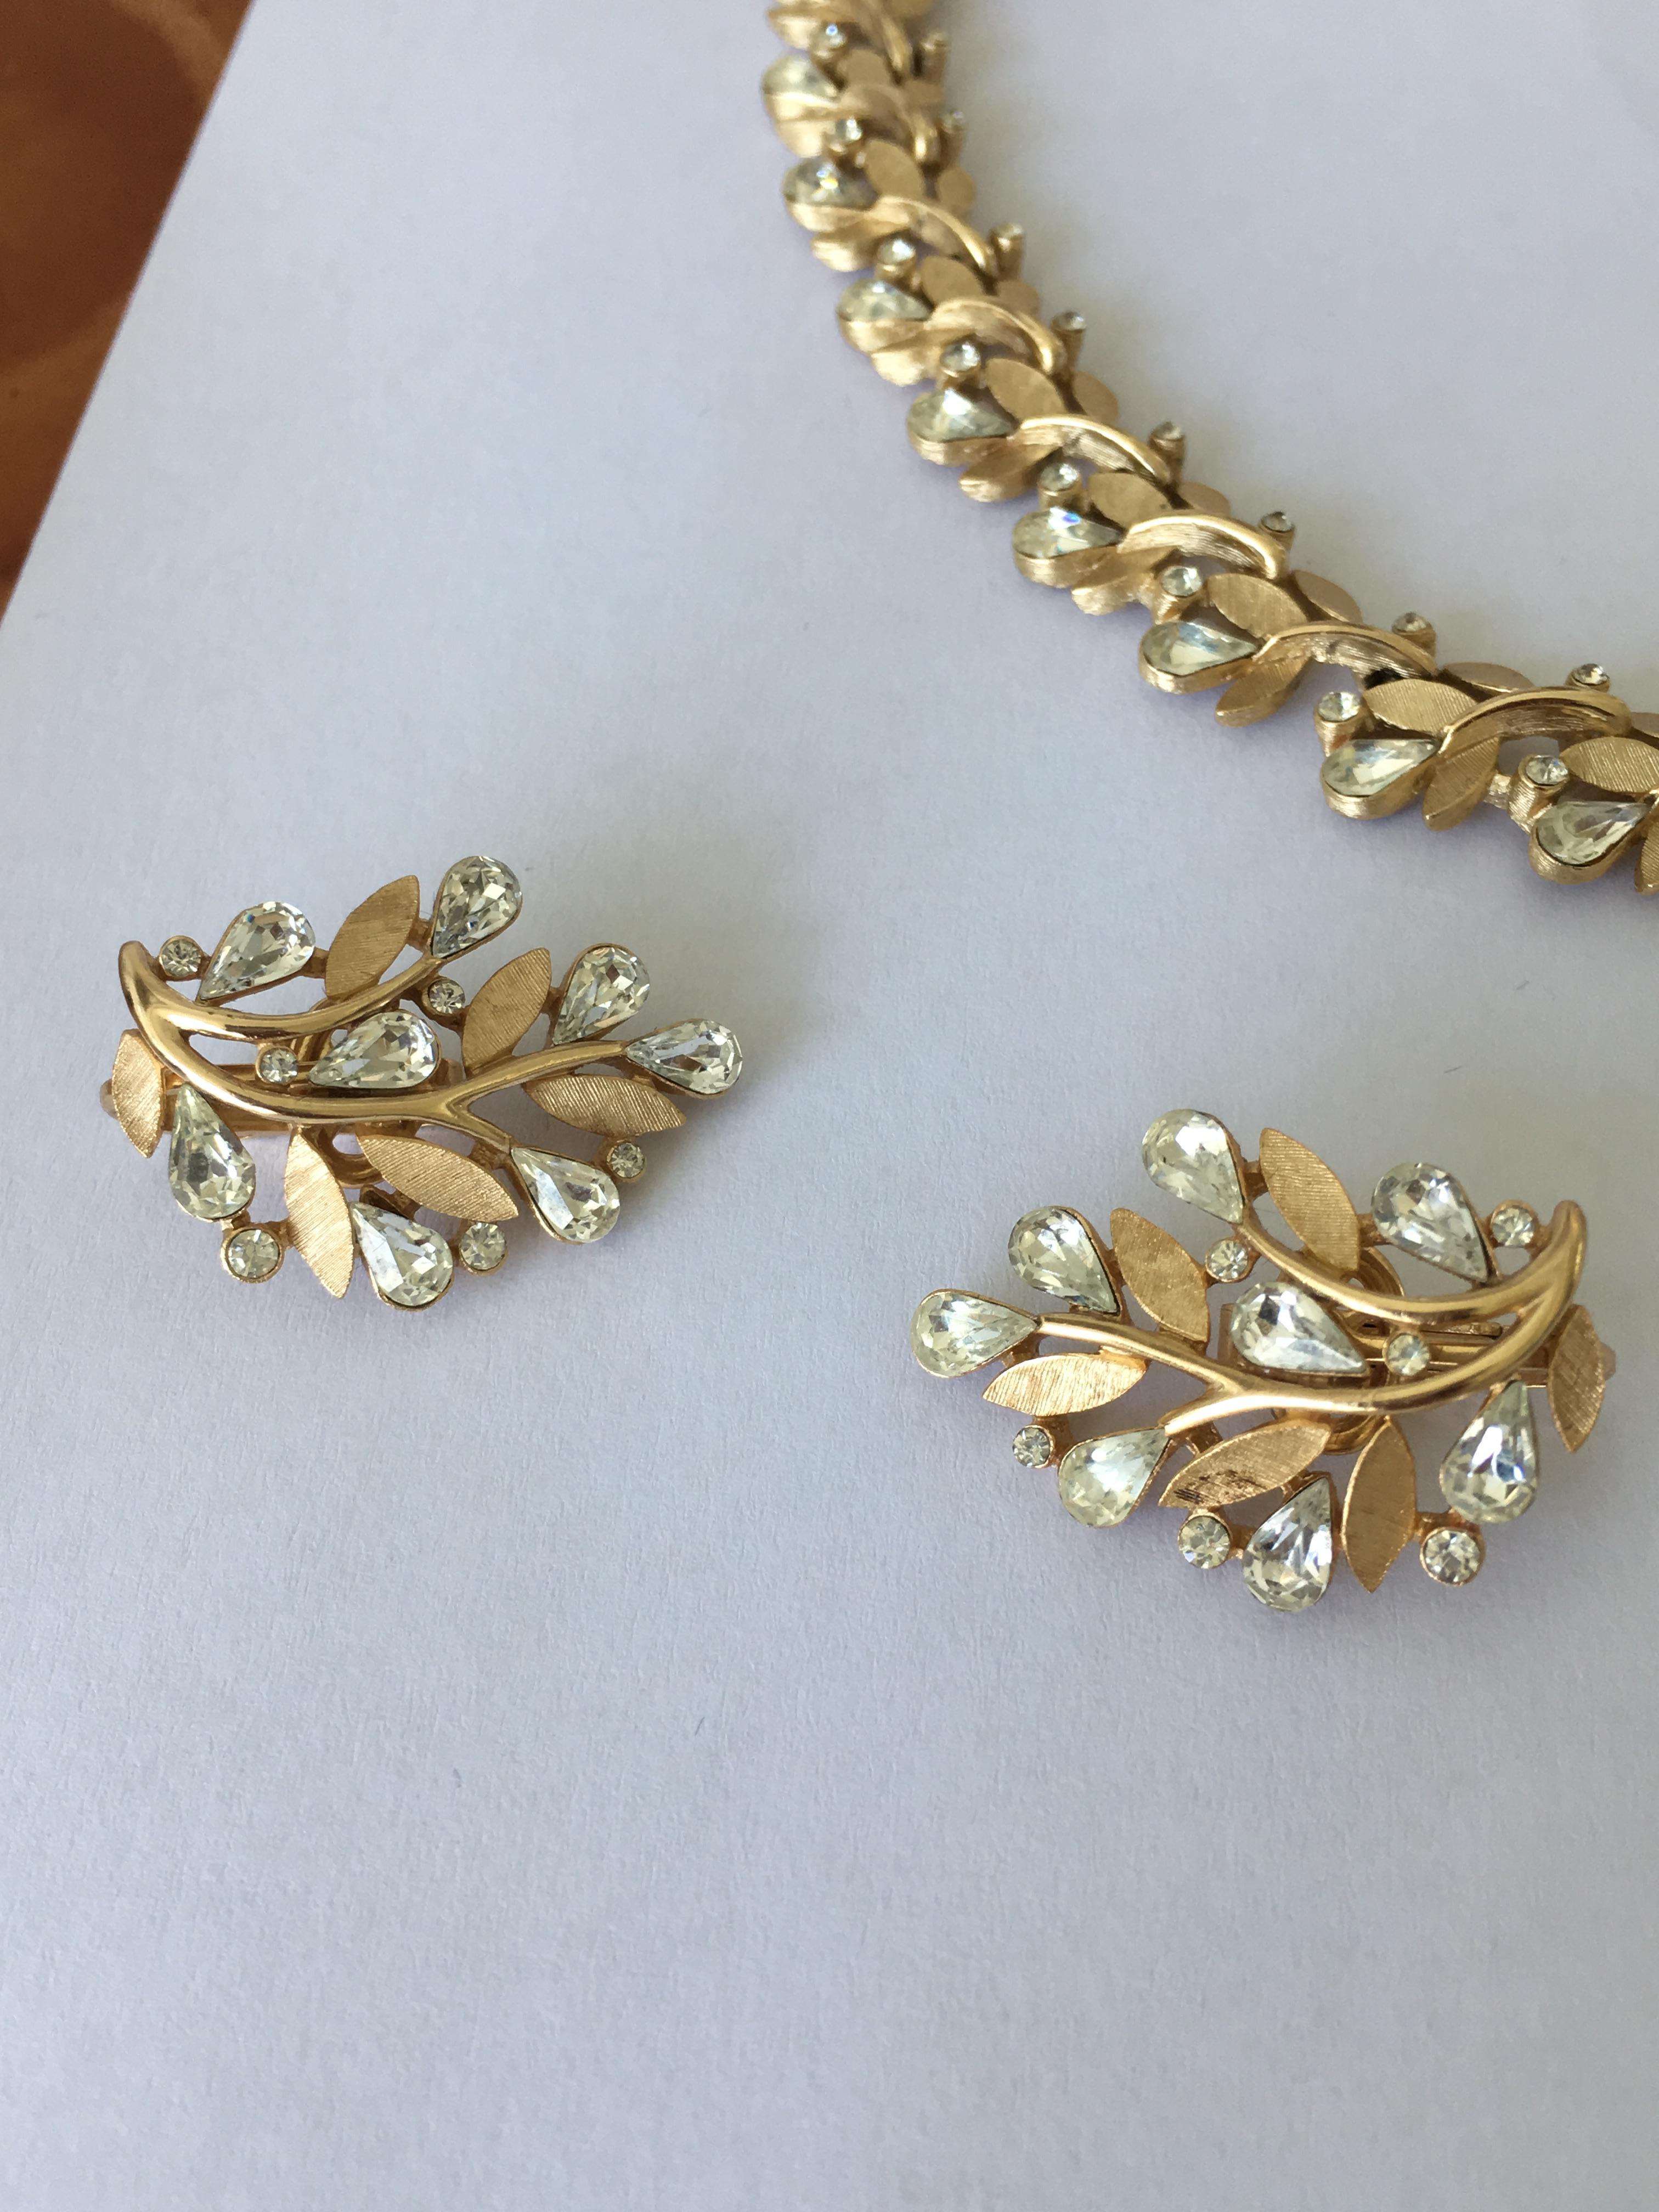 Vintage Costume Jewelry Set by Trifari, circa 1960 For Sale 4